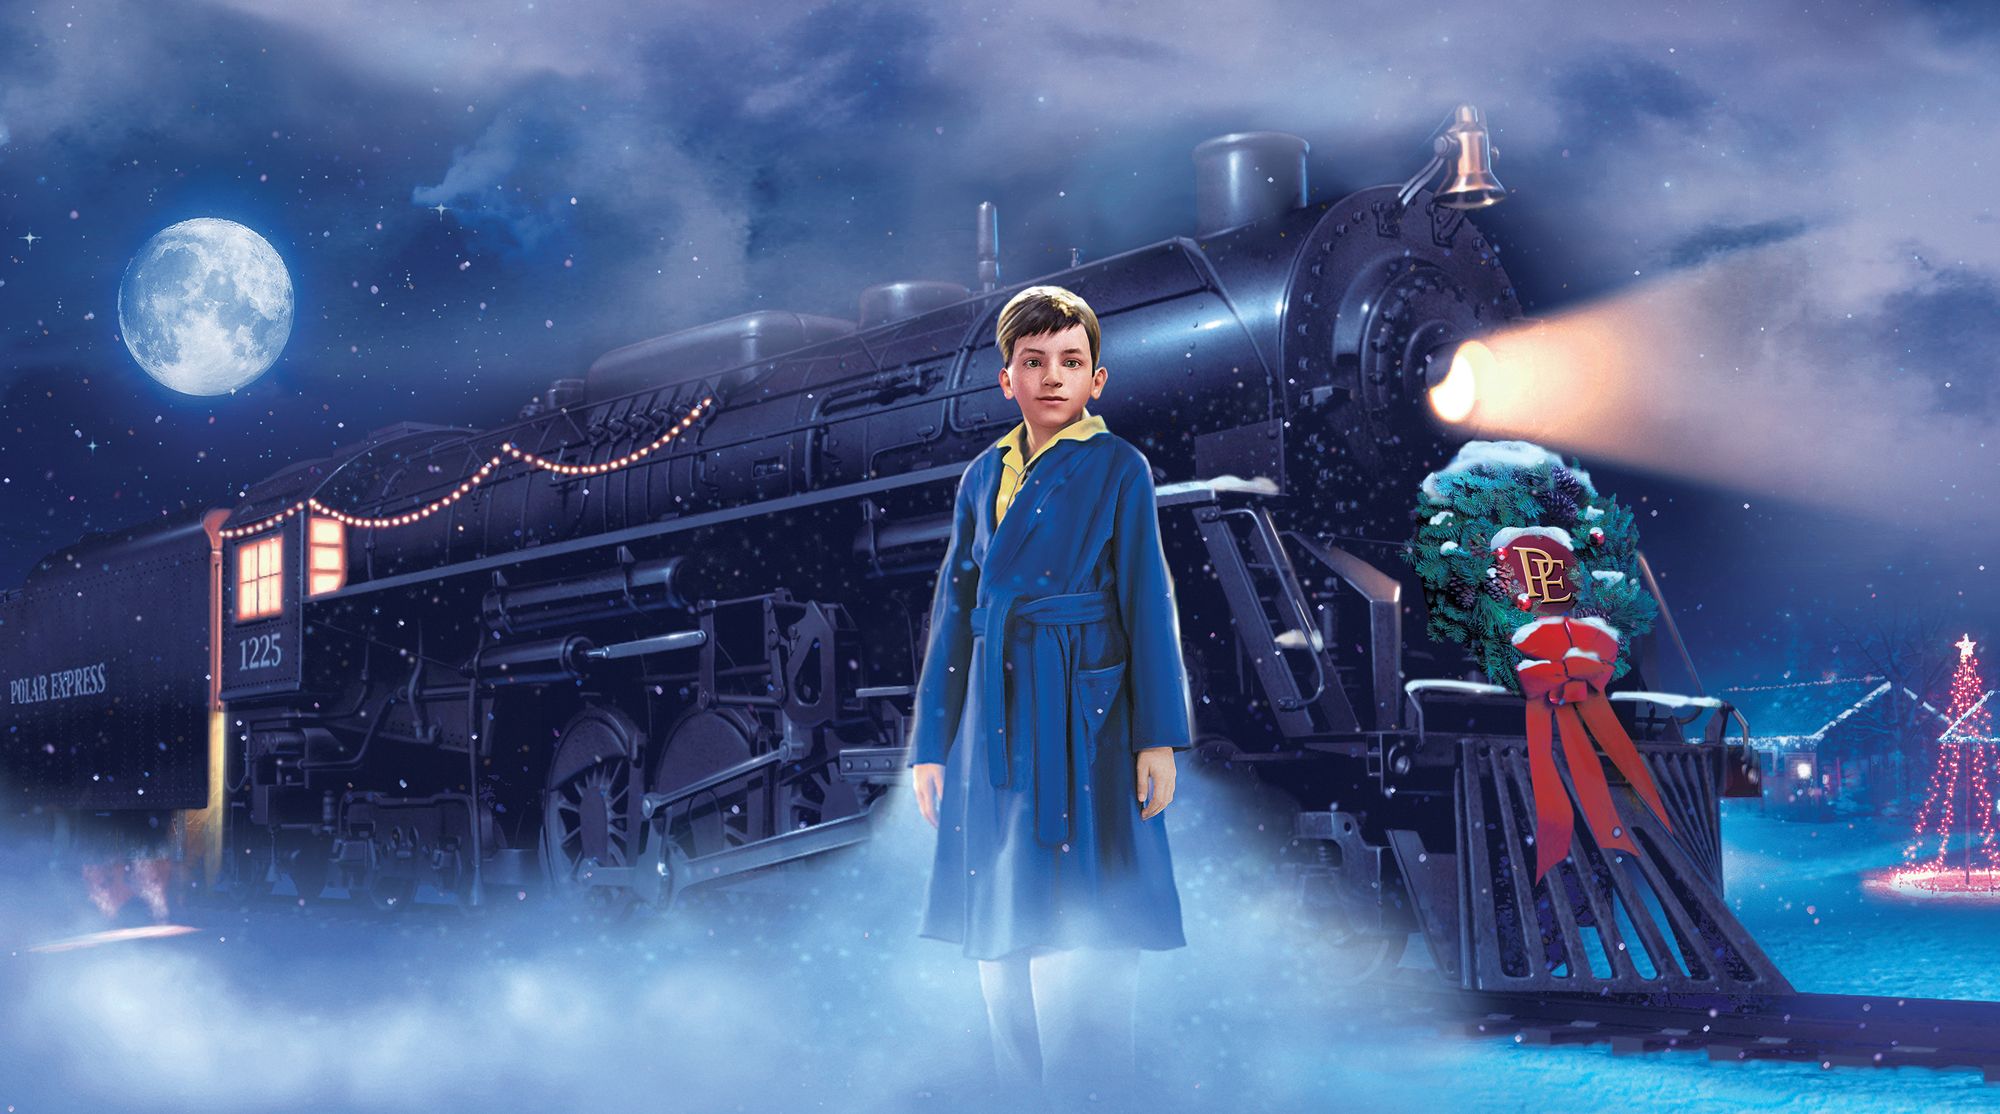 The main character of the movie stands in front of the polar express